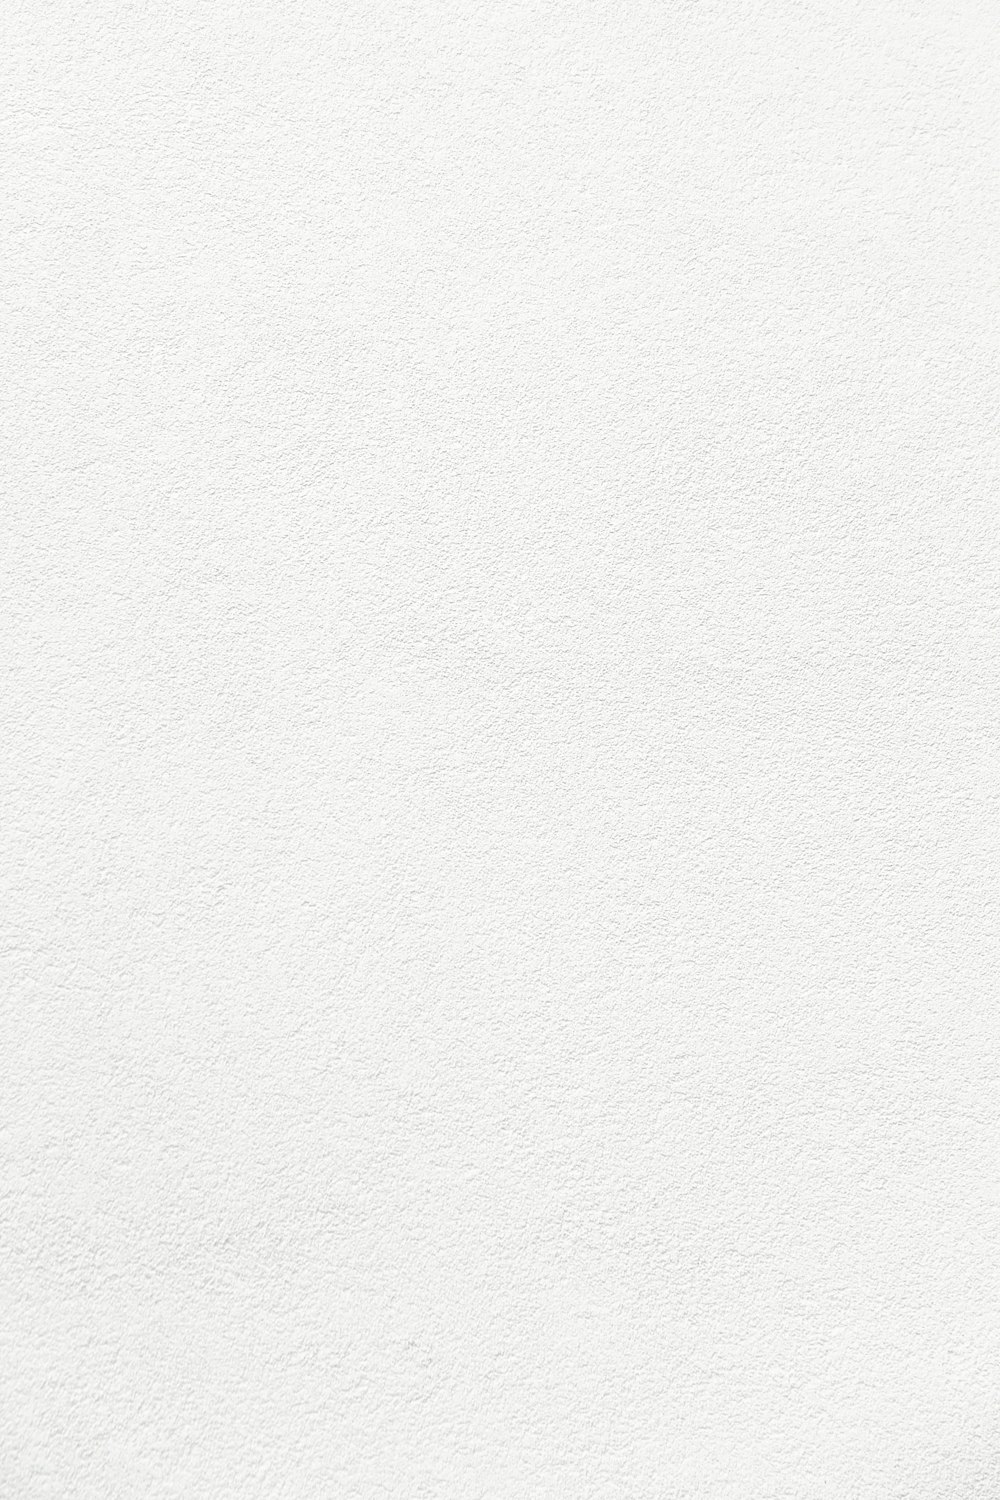 White Ribbed Paper As Background Stock Photo - Download Image Now -  Textured Effect, Textured, Paper - iStock